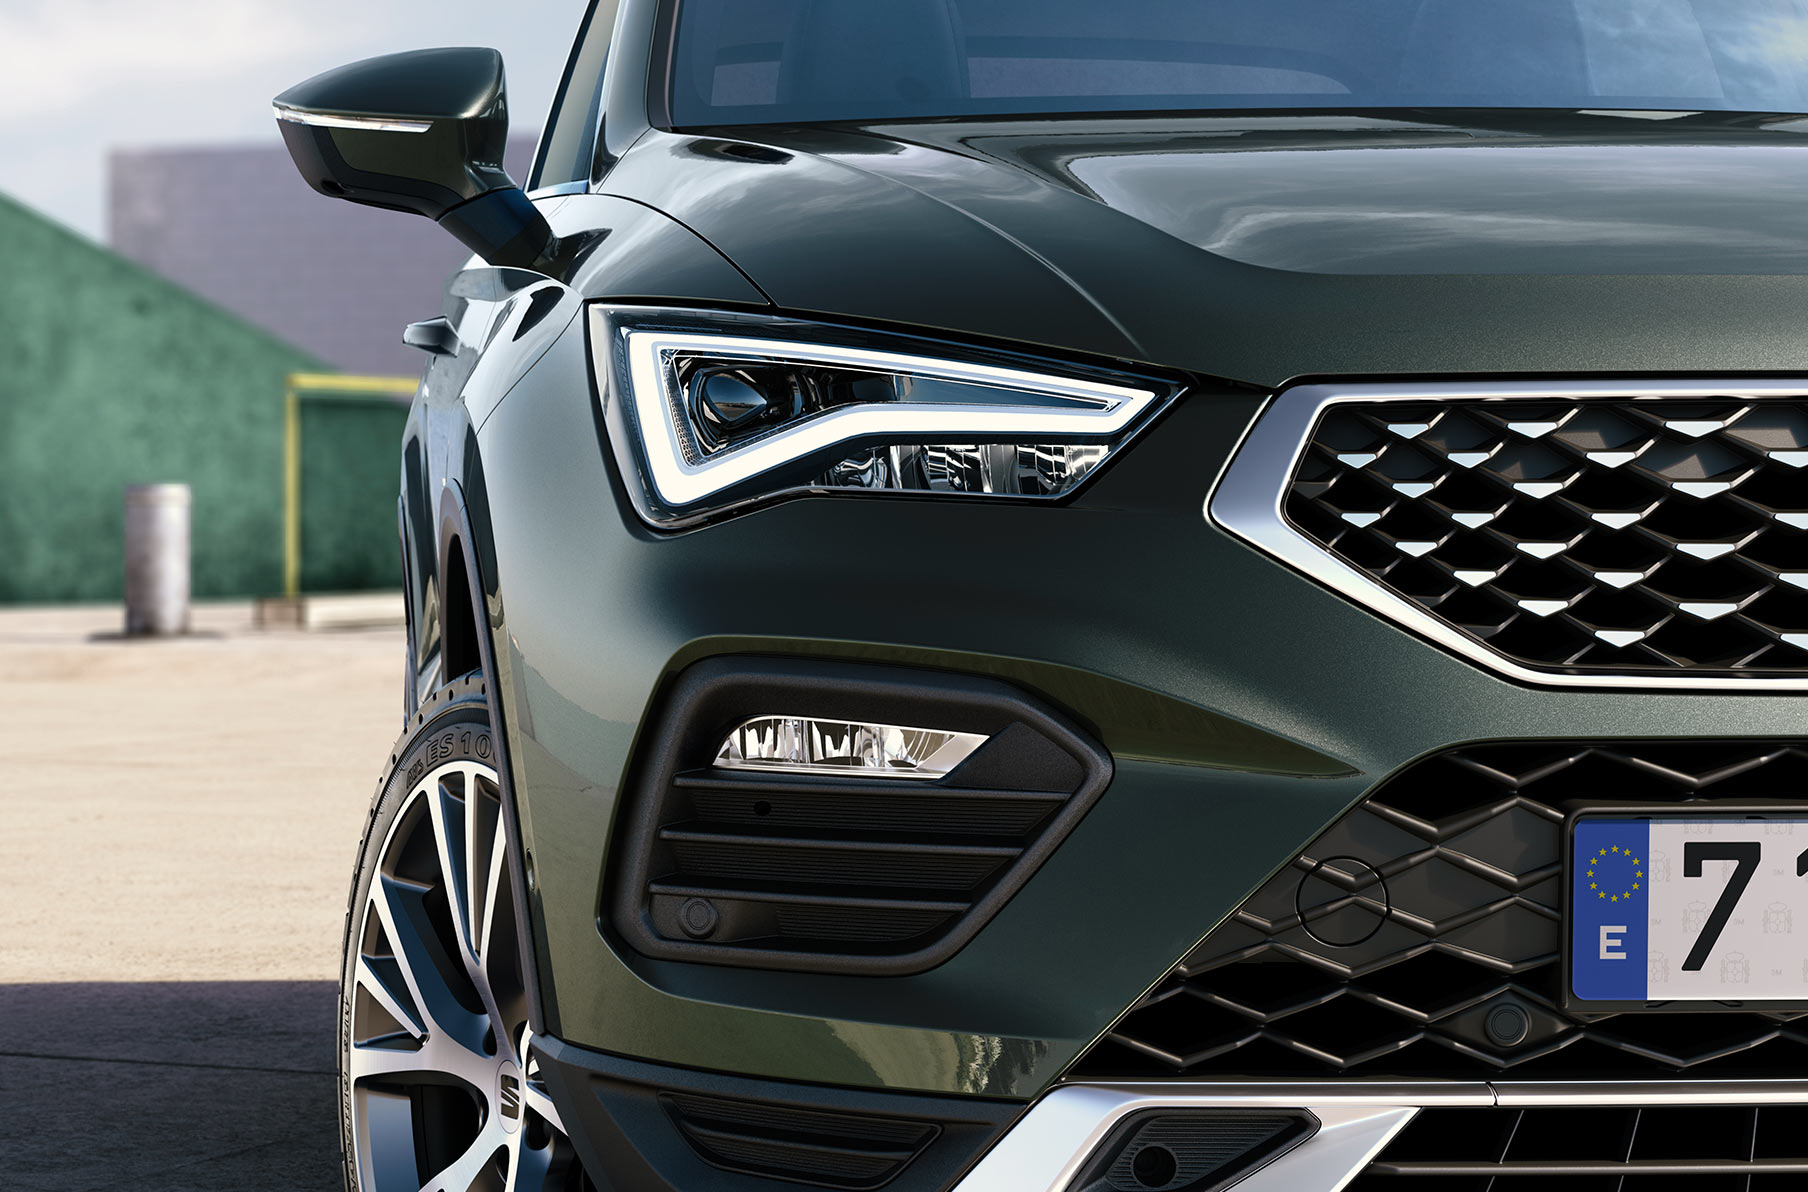 seat-ateca-dark-camouflage-colour-with-front-led-headlines